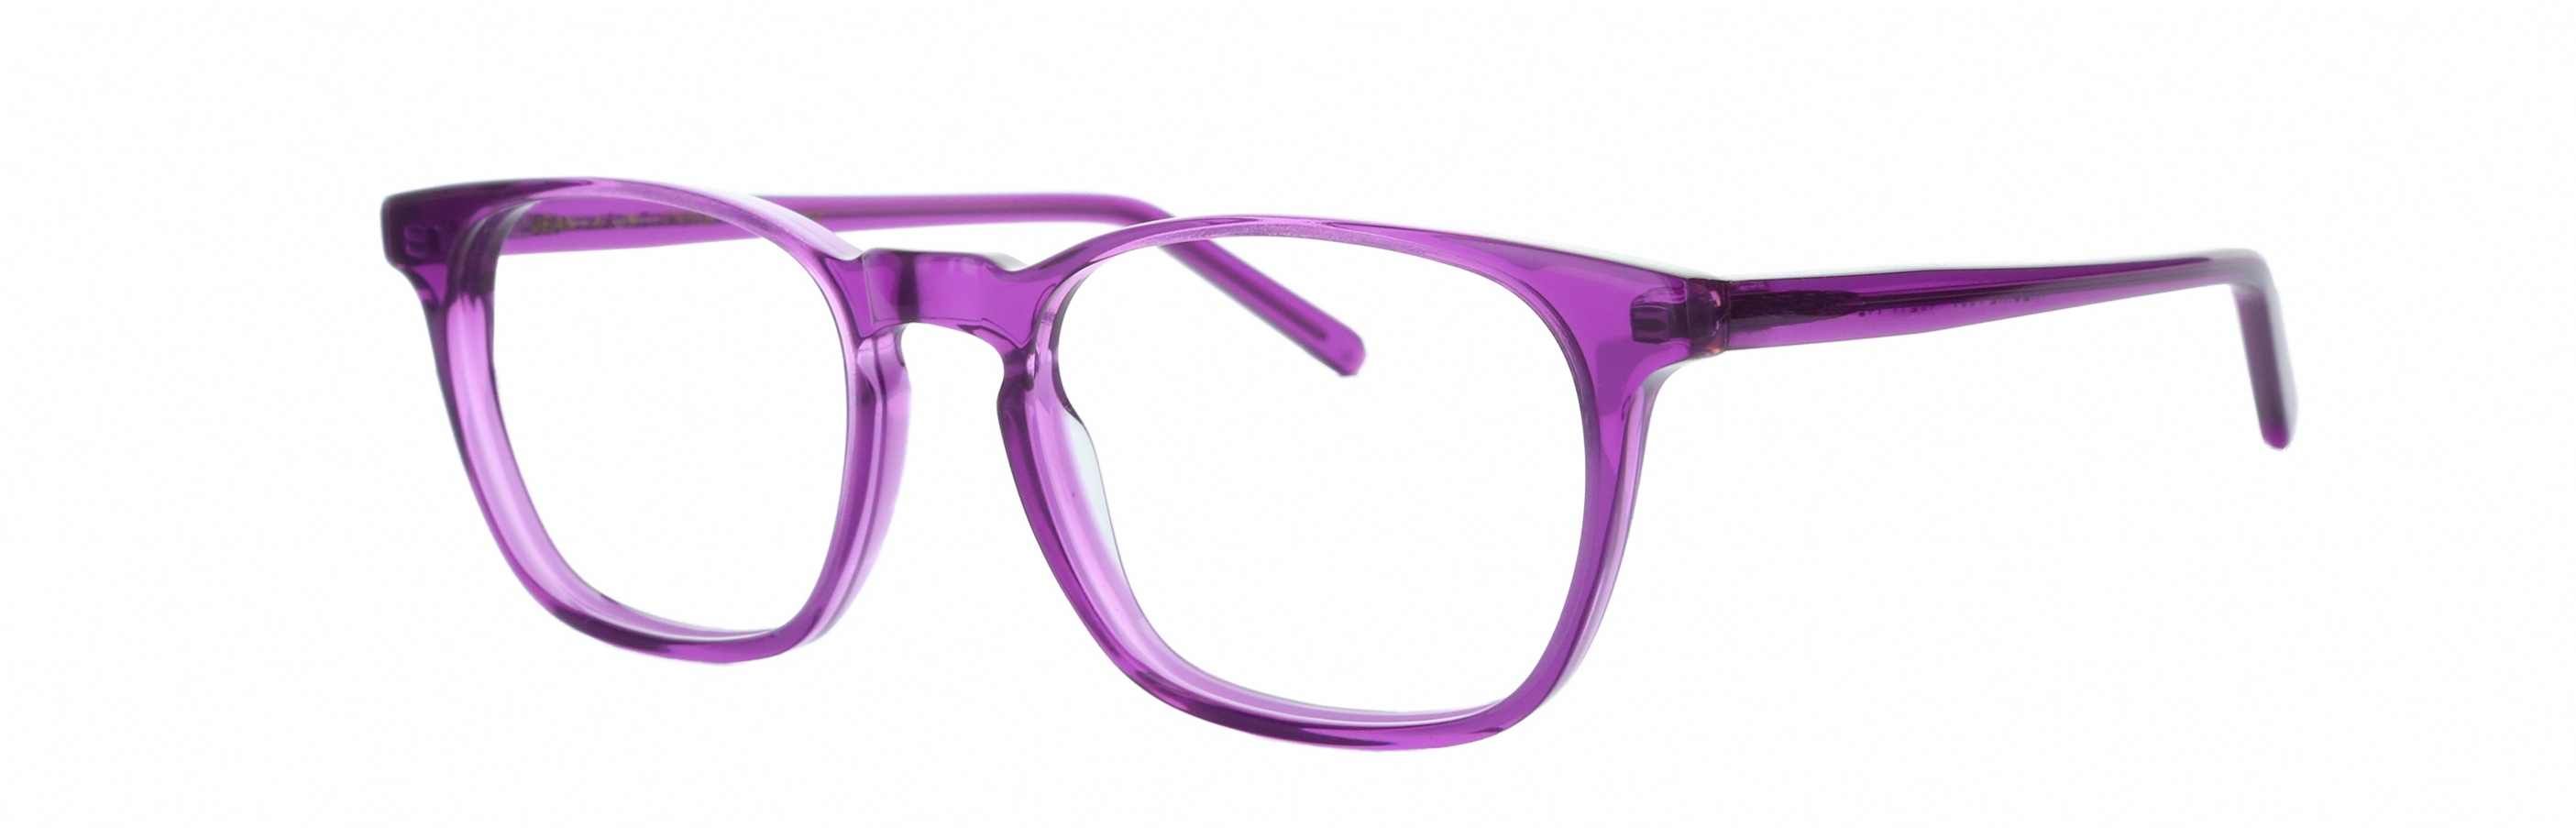 LAFONT THEORIE 7061